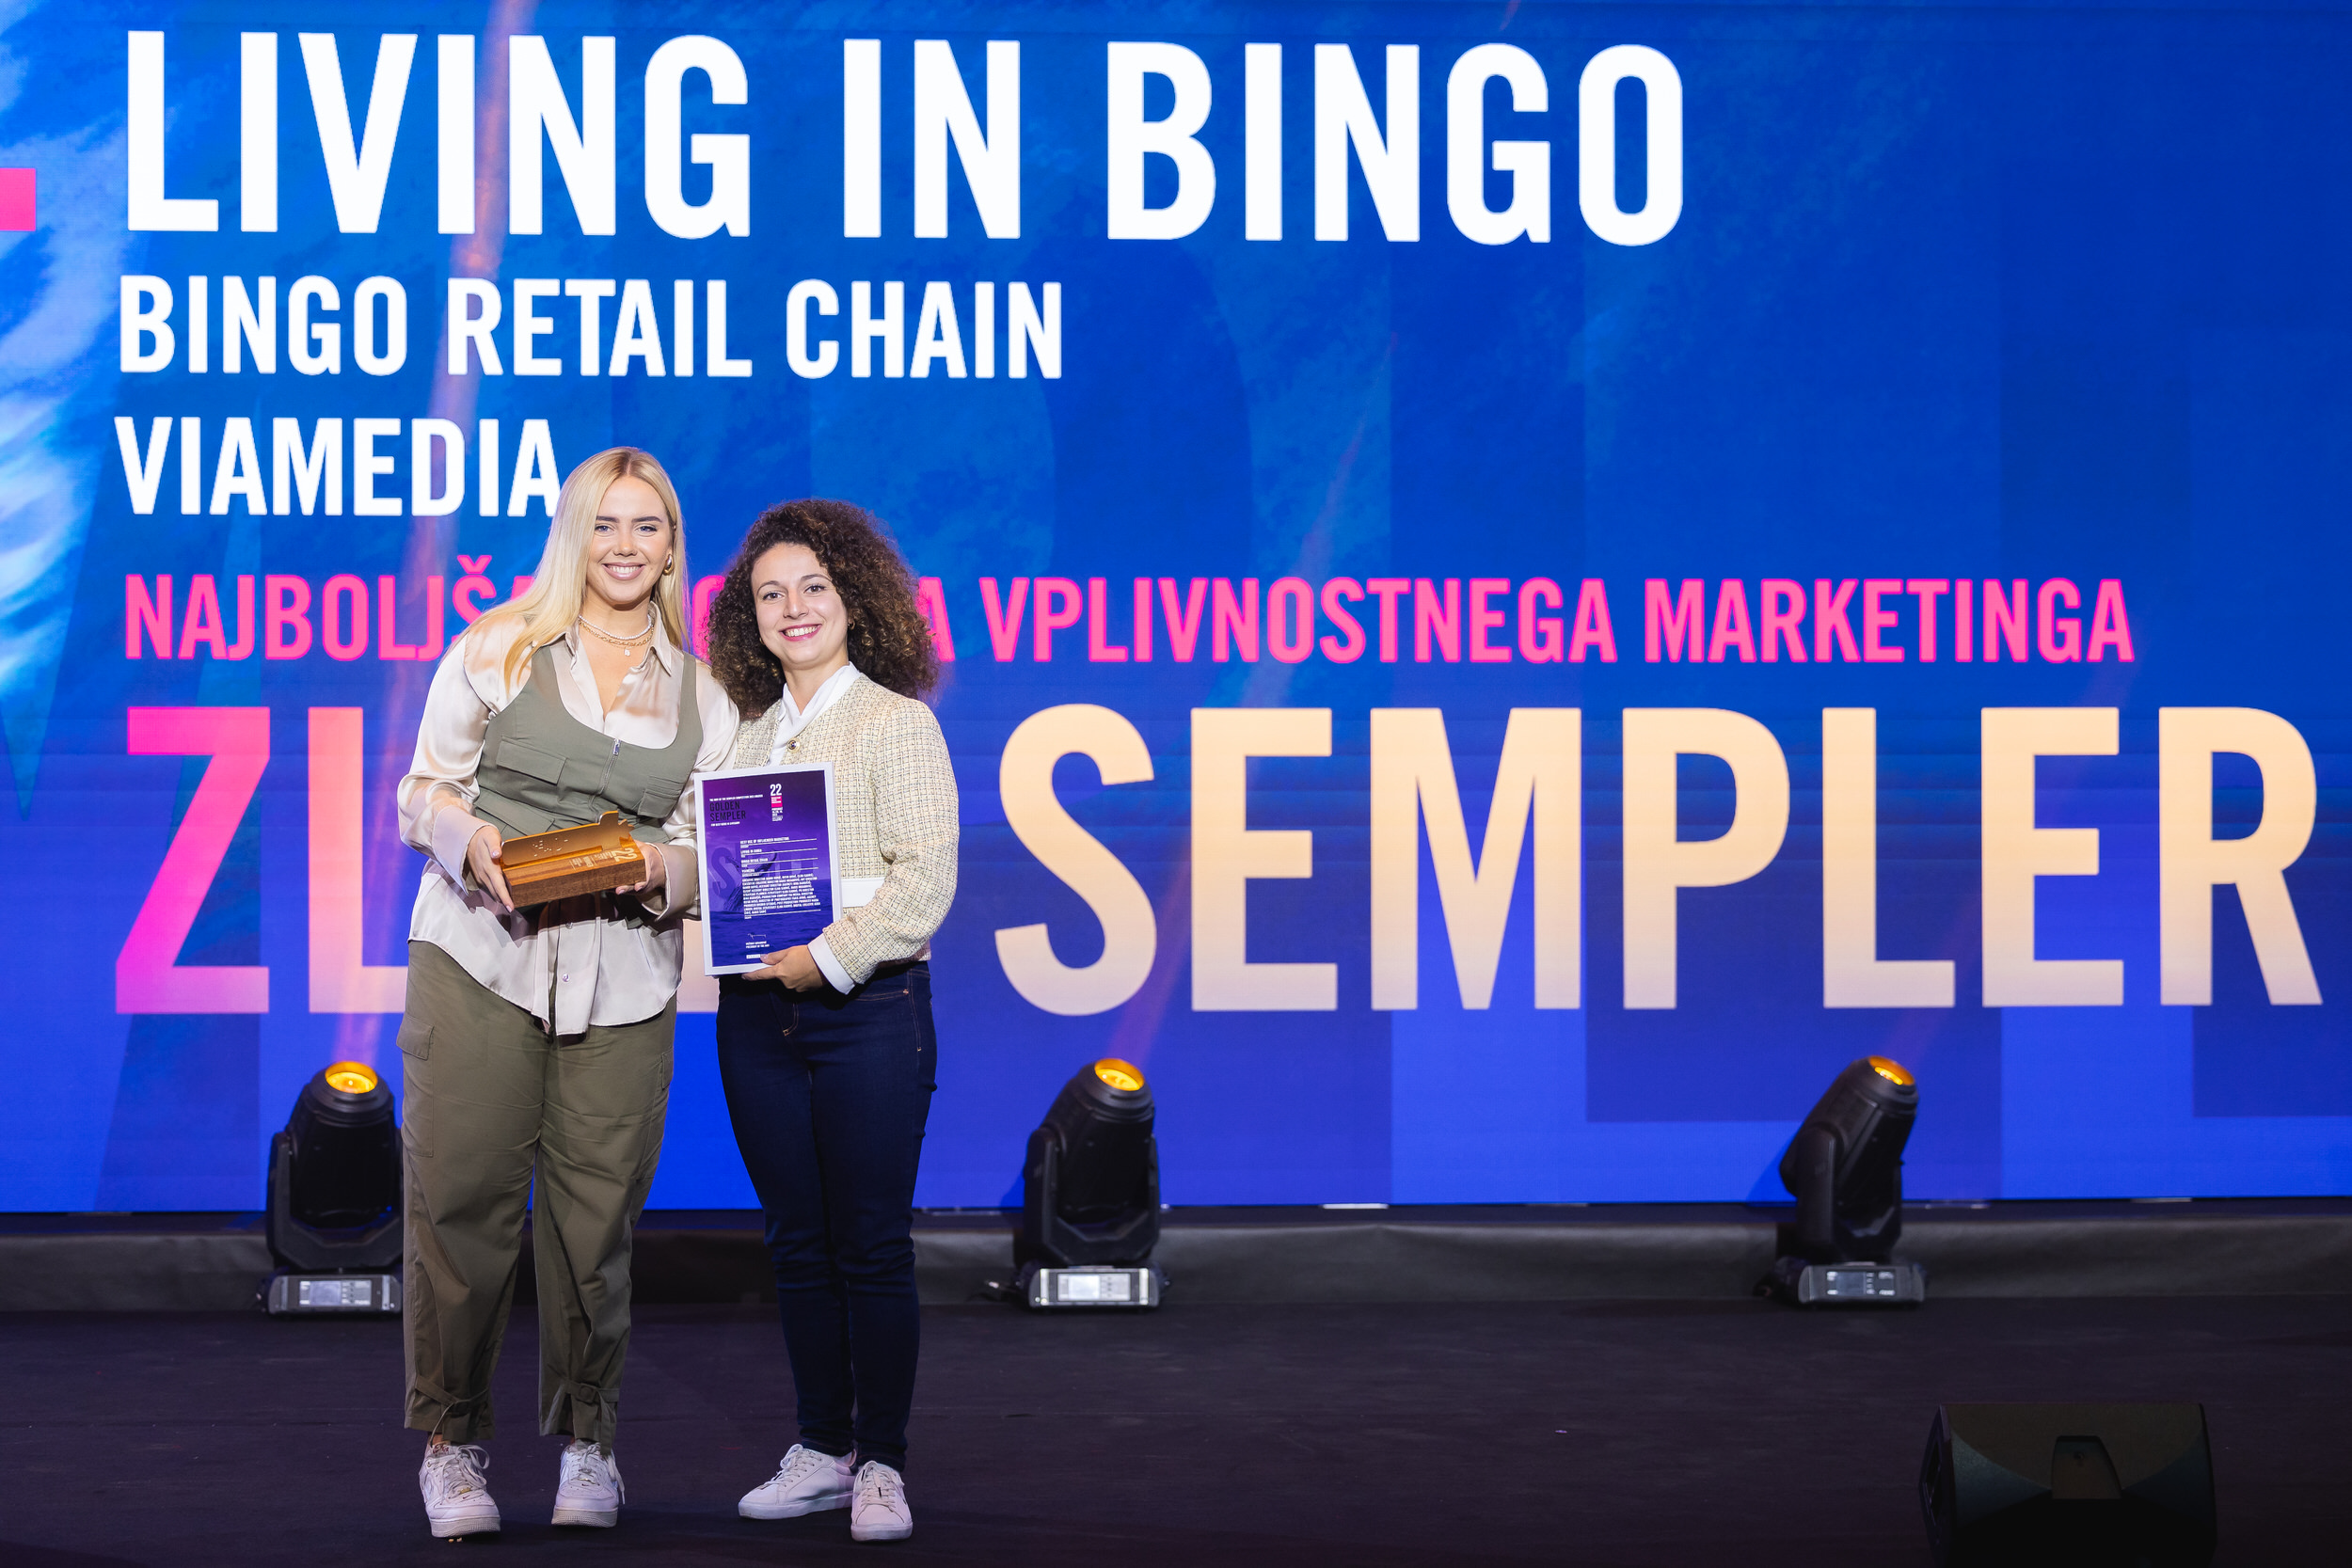 The Grand Sempler goes to »Living in Bingo« from Bosnia and Herzegovina